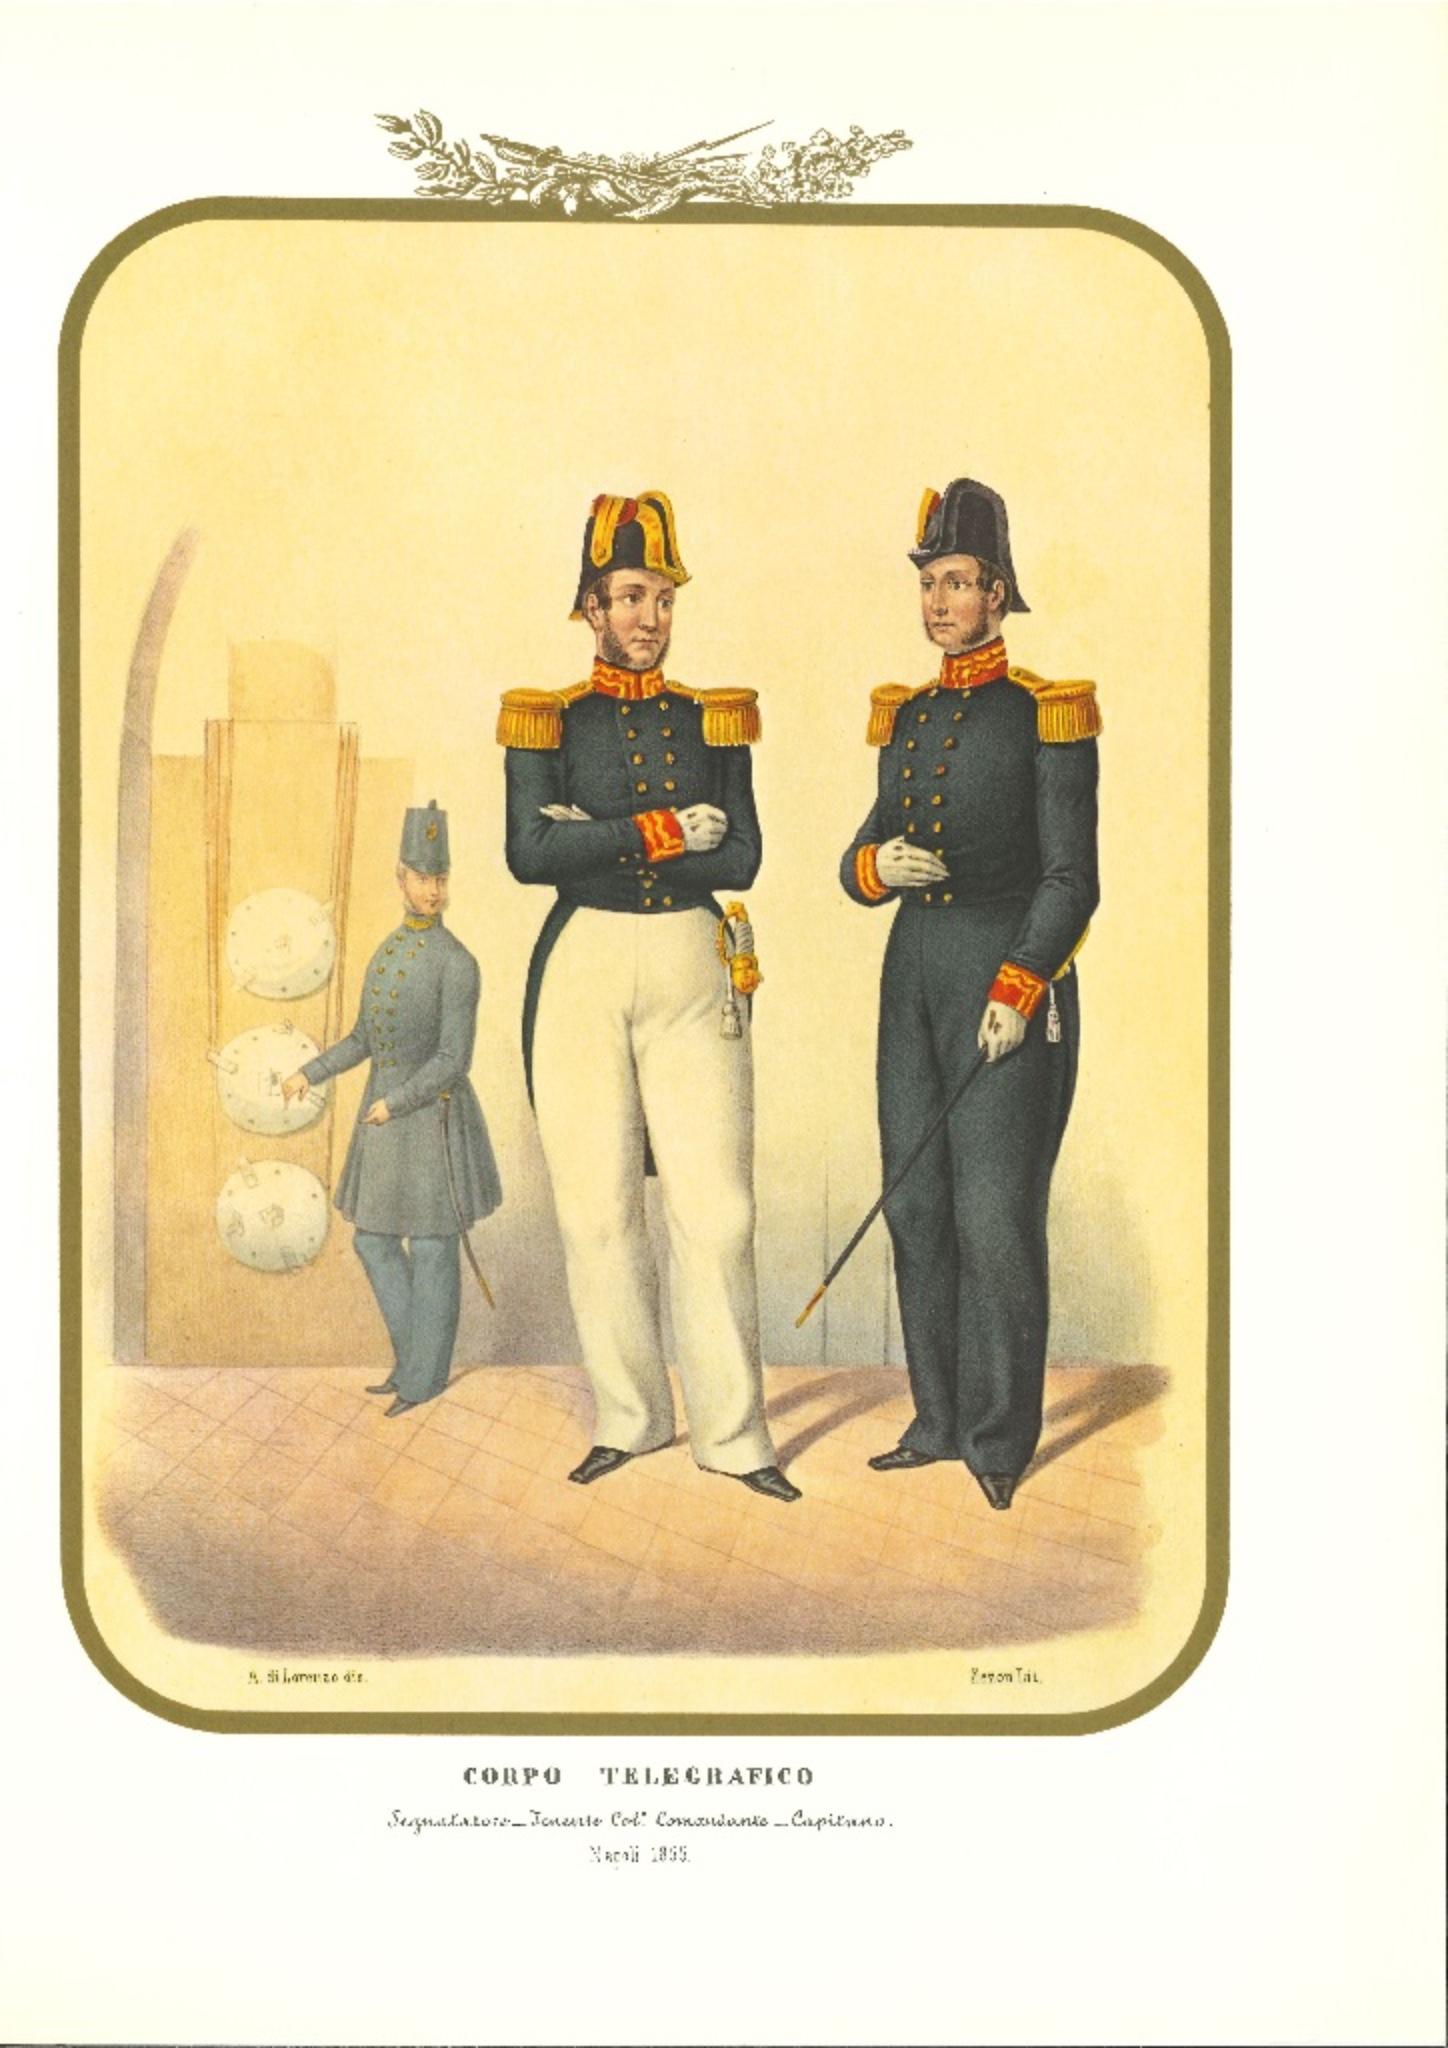 Telegraphic Corps is a lithograph by Antonio Zezon. Naples 1855.

Interesting colored lithograph which describes the Telegraphic Body: on the foreground, the Lieutenant Colonel commander and the Captain; on the background, the Signalman. 

In